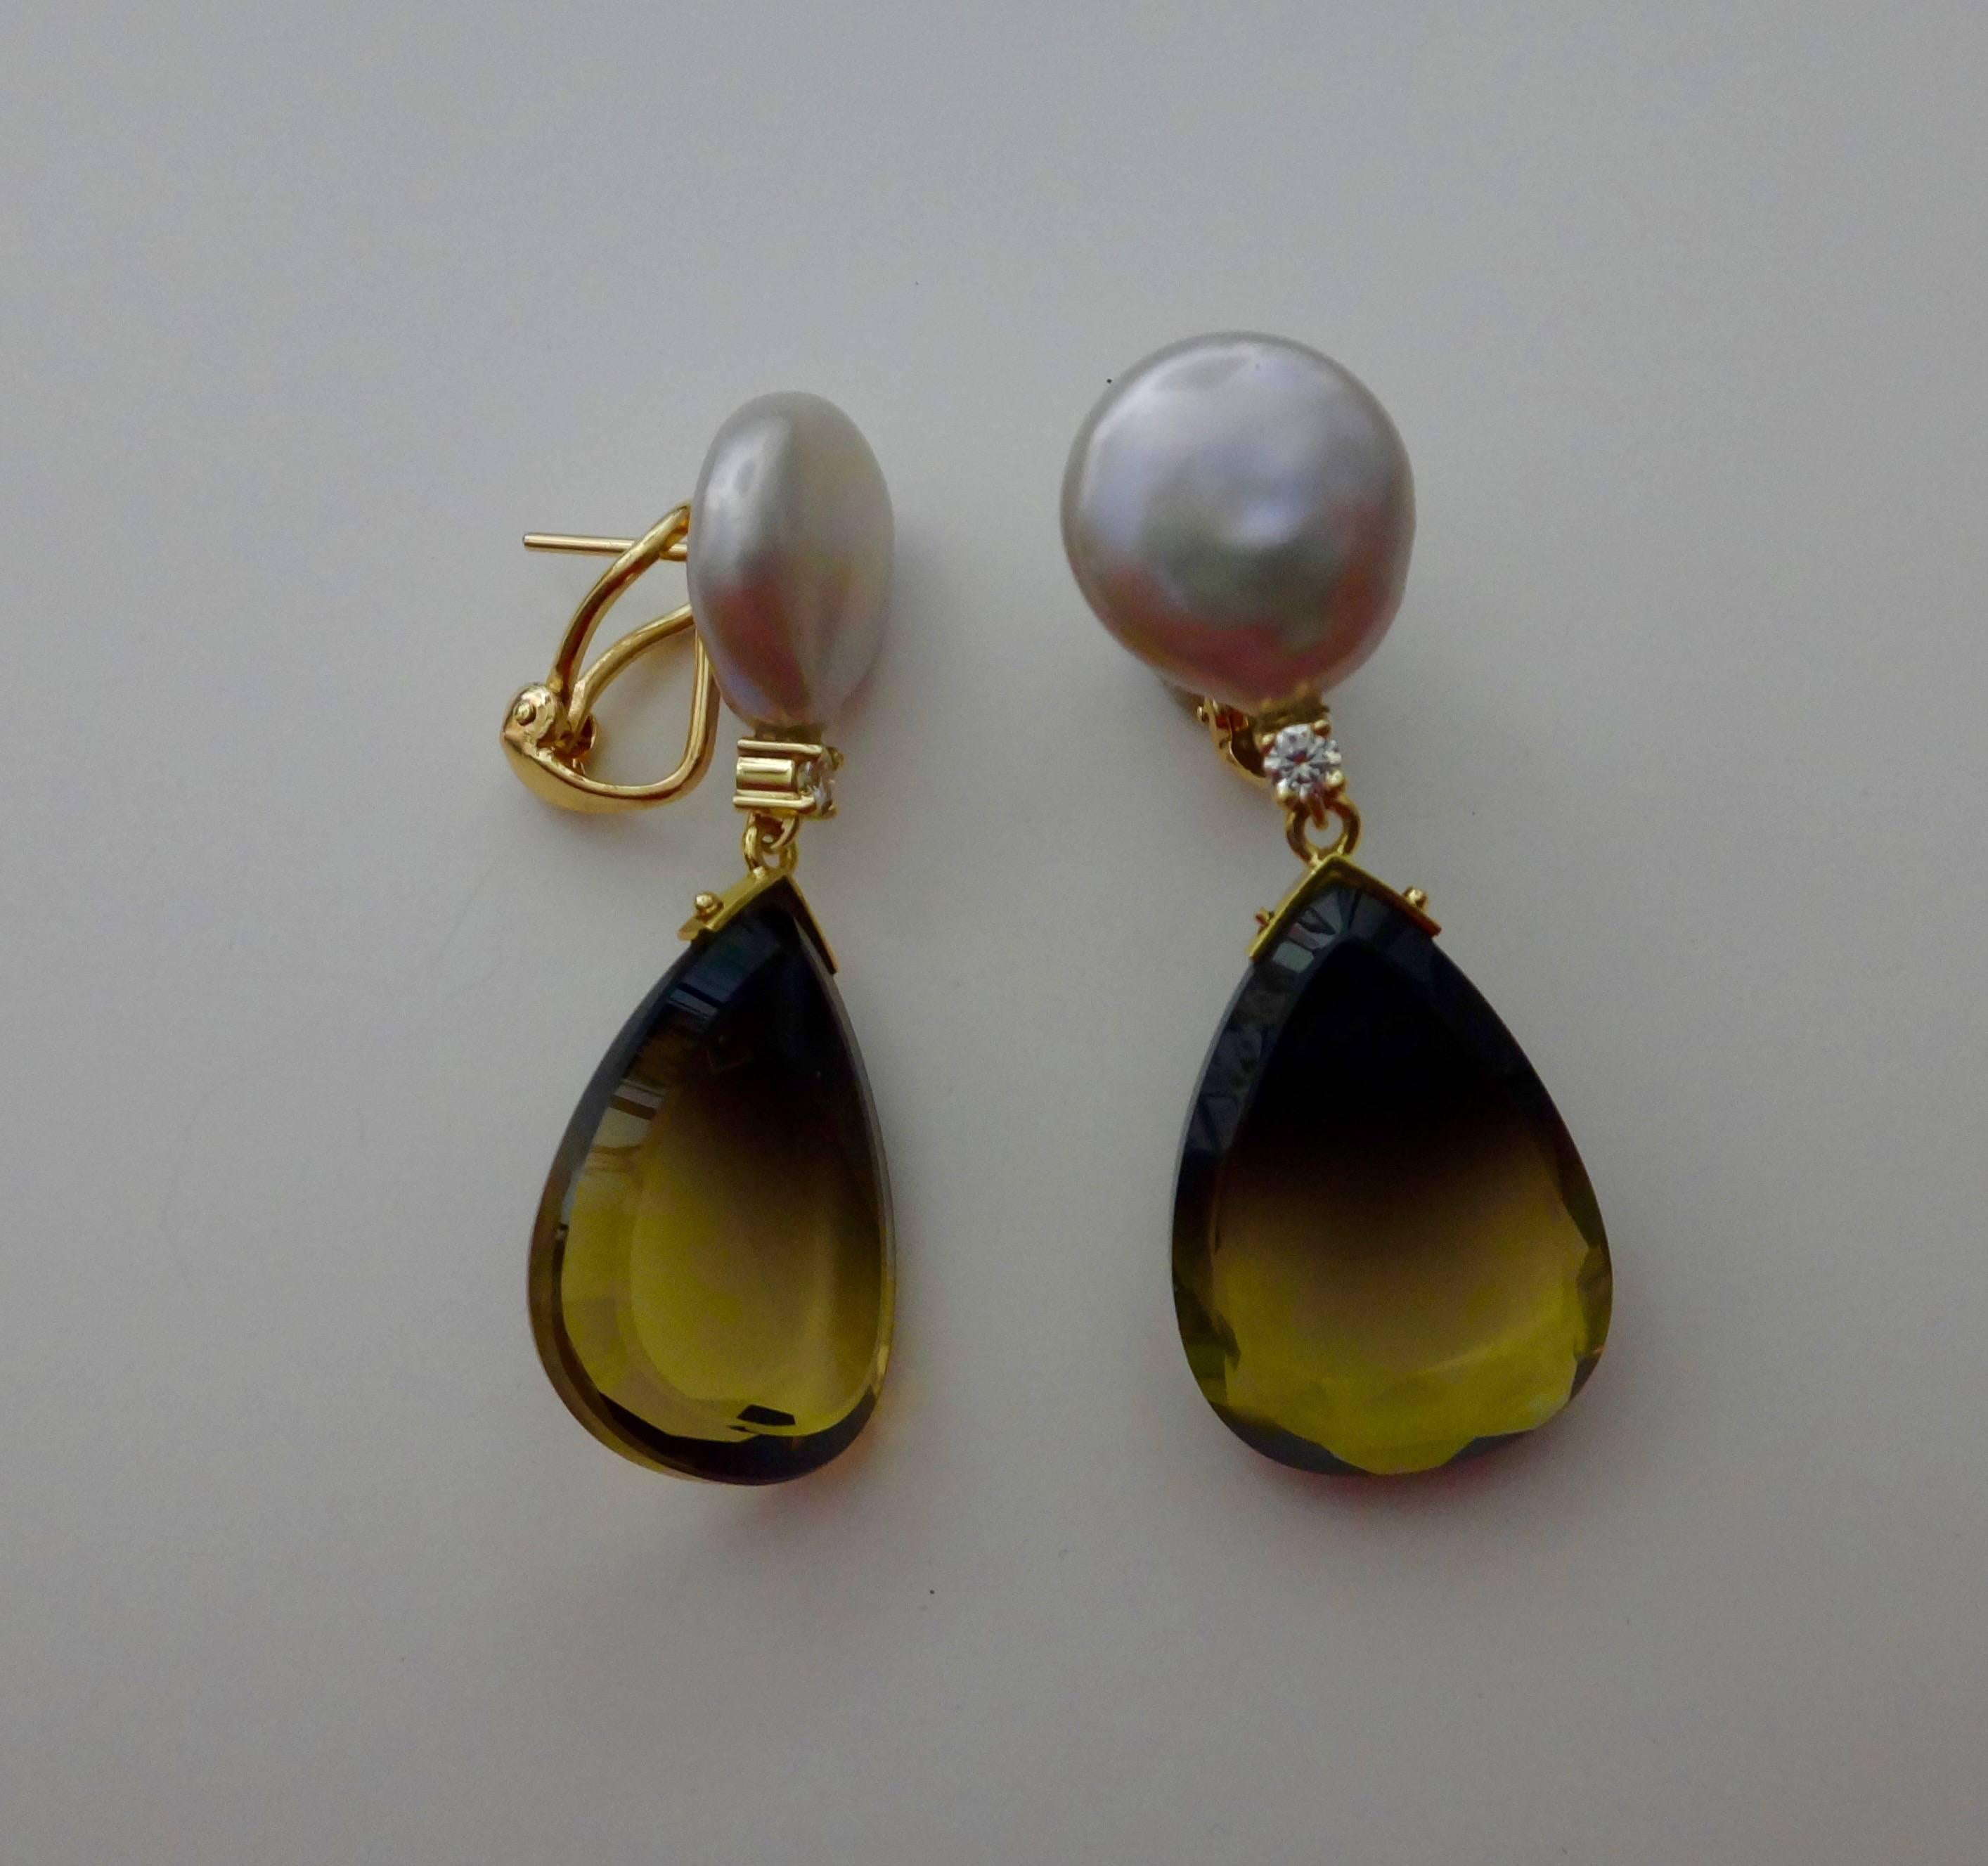 Pear shaped slices if bi-color quartz graduated in color from espresso to canary yellow drop from pale gray coin pearls and diamonds in these dangle earrings.  The gems are faceted around the edges to add further sparkle.  The earrings have post